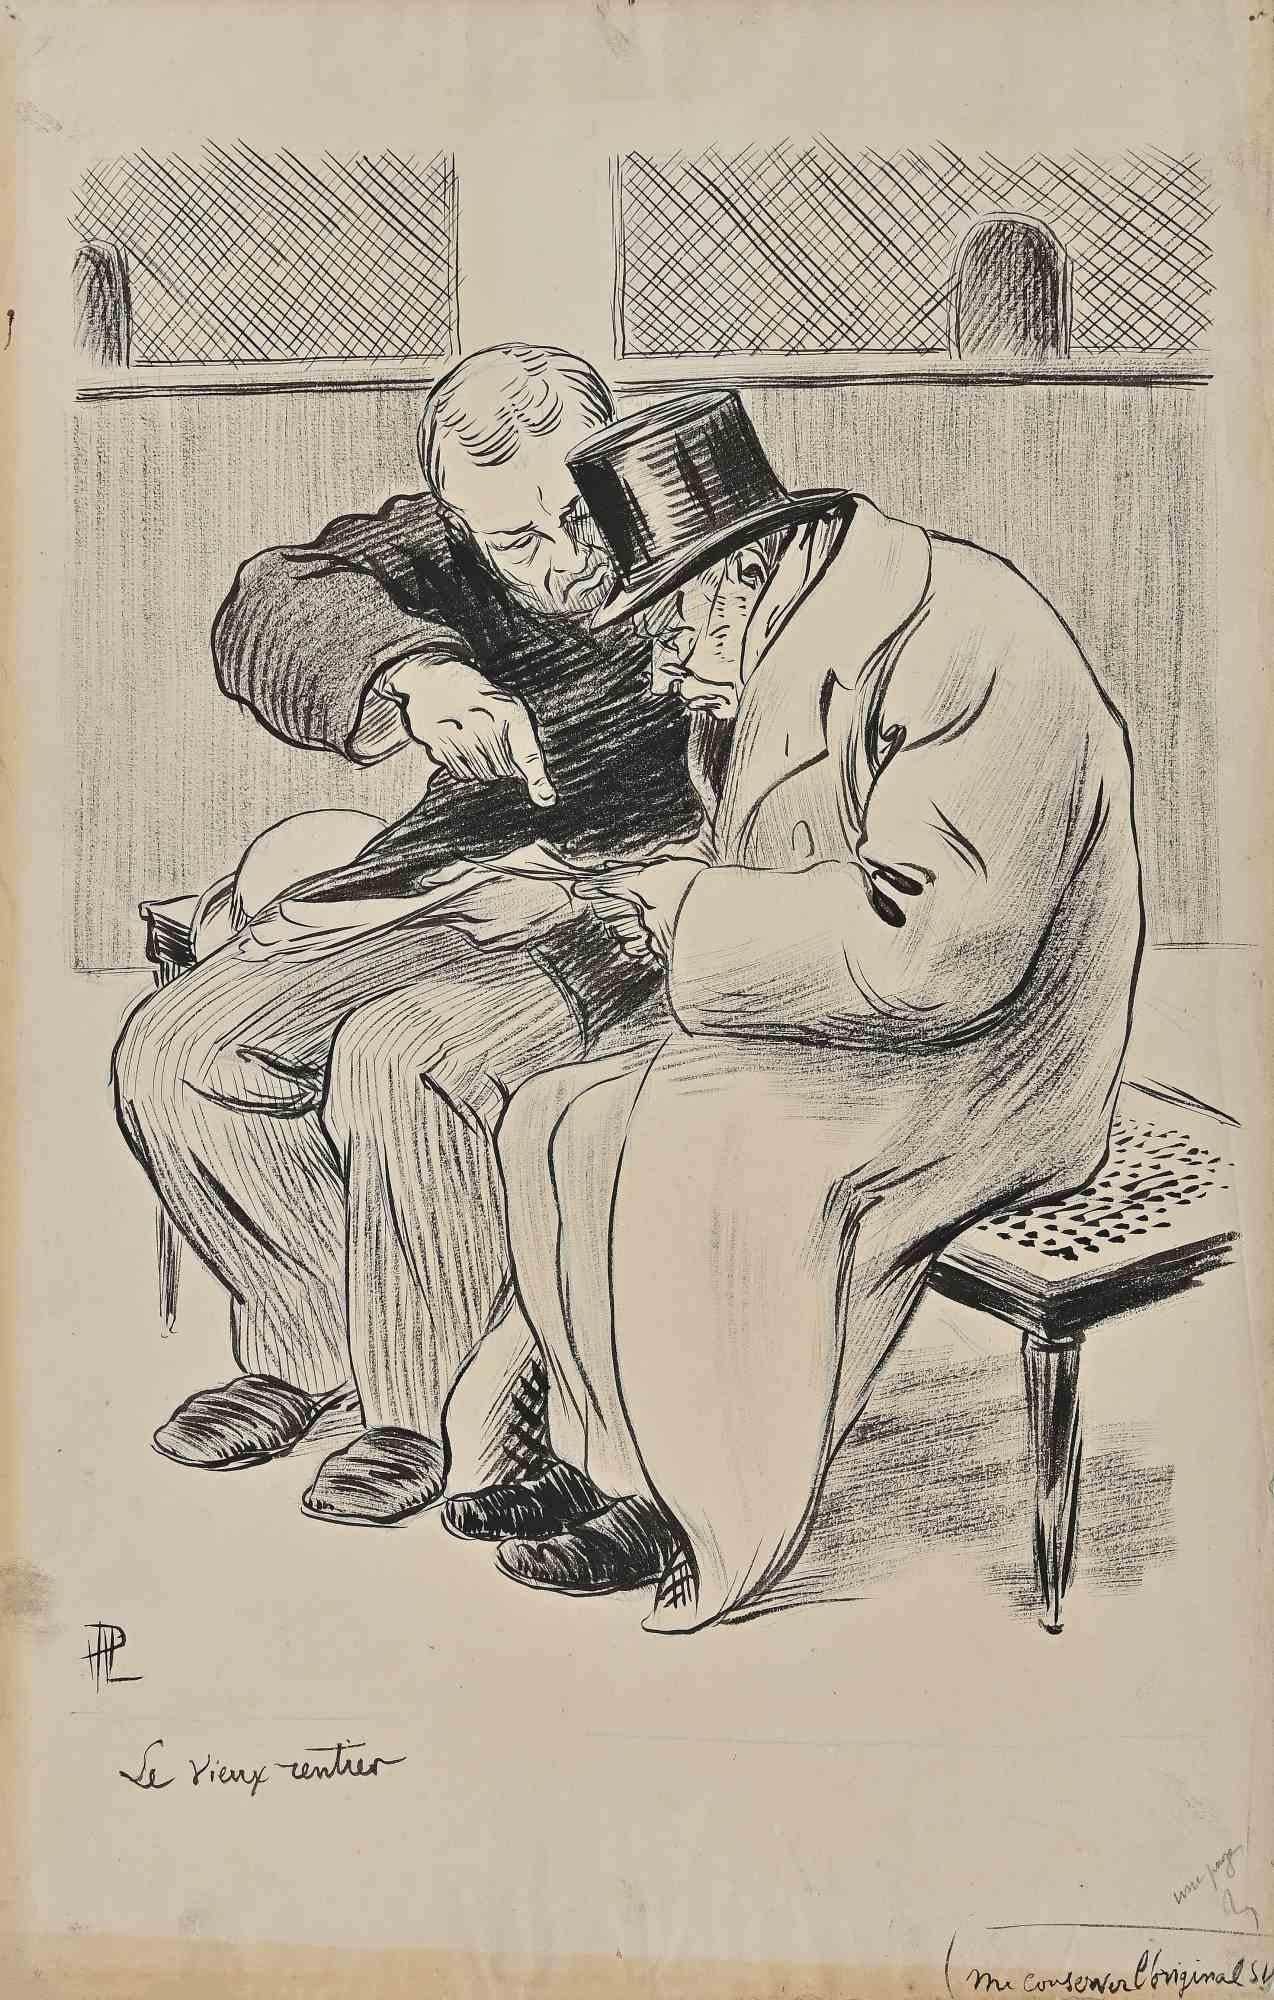 Le Vieux Monsieur is a drawing realized by Hermann Paul.

Hand Signed and titled on the lower left corner.

Good condition except some ripples on the yellowed paper.

René Georges Hermann-Paul (27 December 1864 – 23 June 1940) was a French artist.